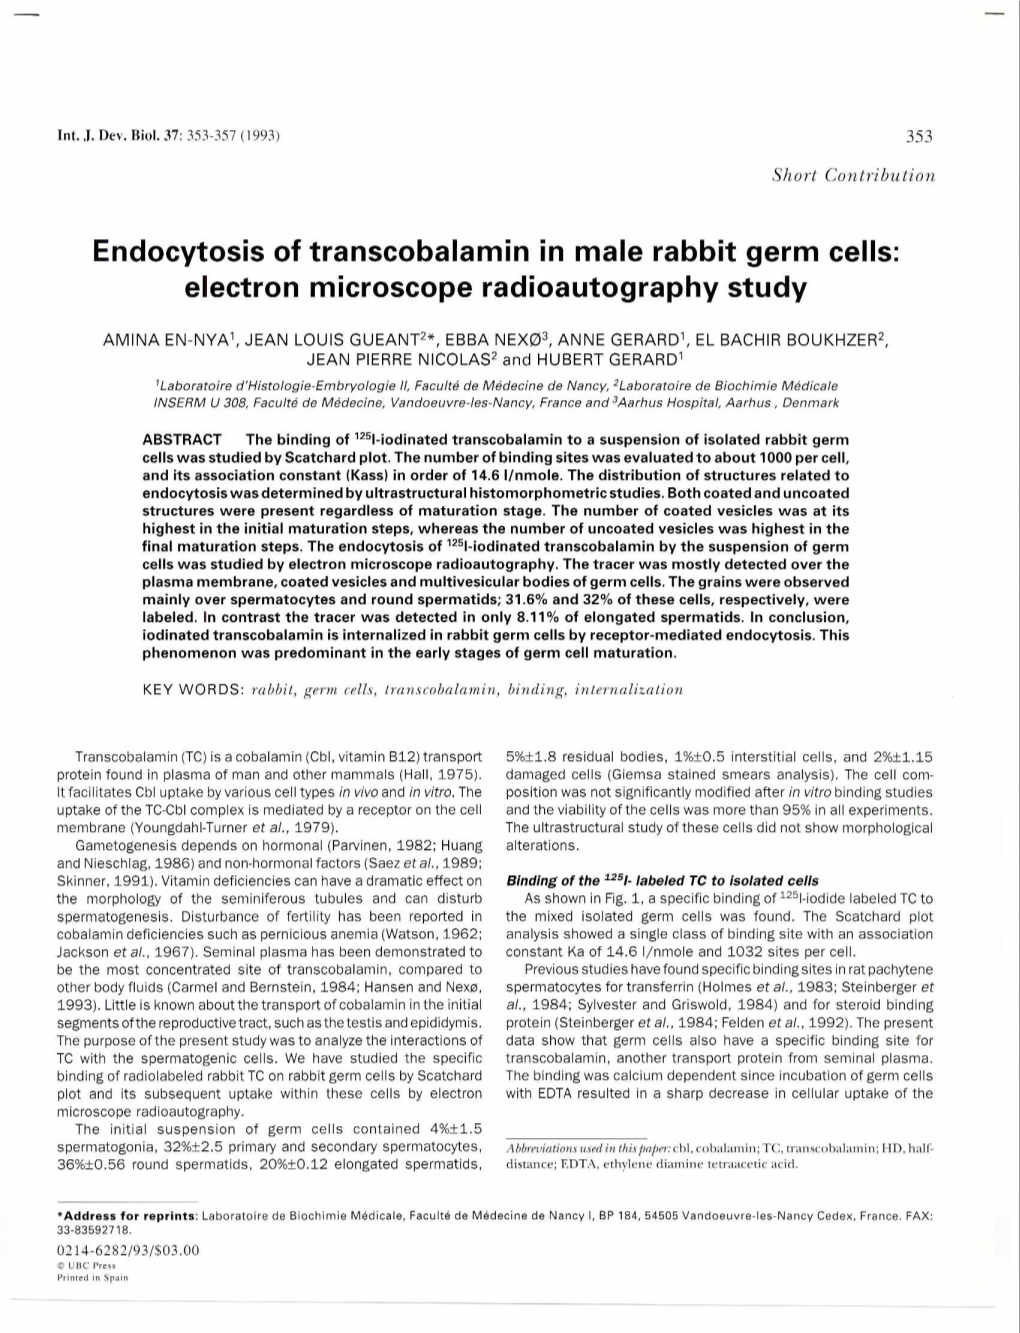 Endocytosis of Transcobalamin in Male Rabbit Germ Cells: Electron Microscope Radioautography Study